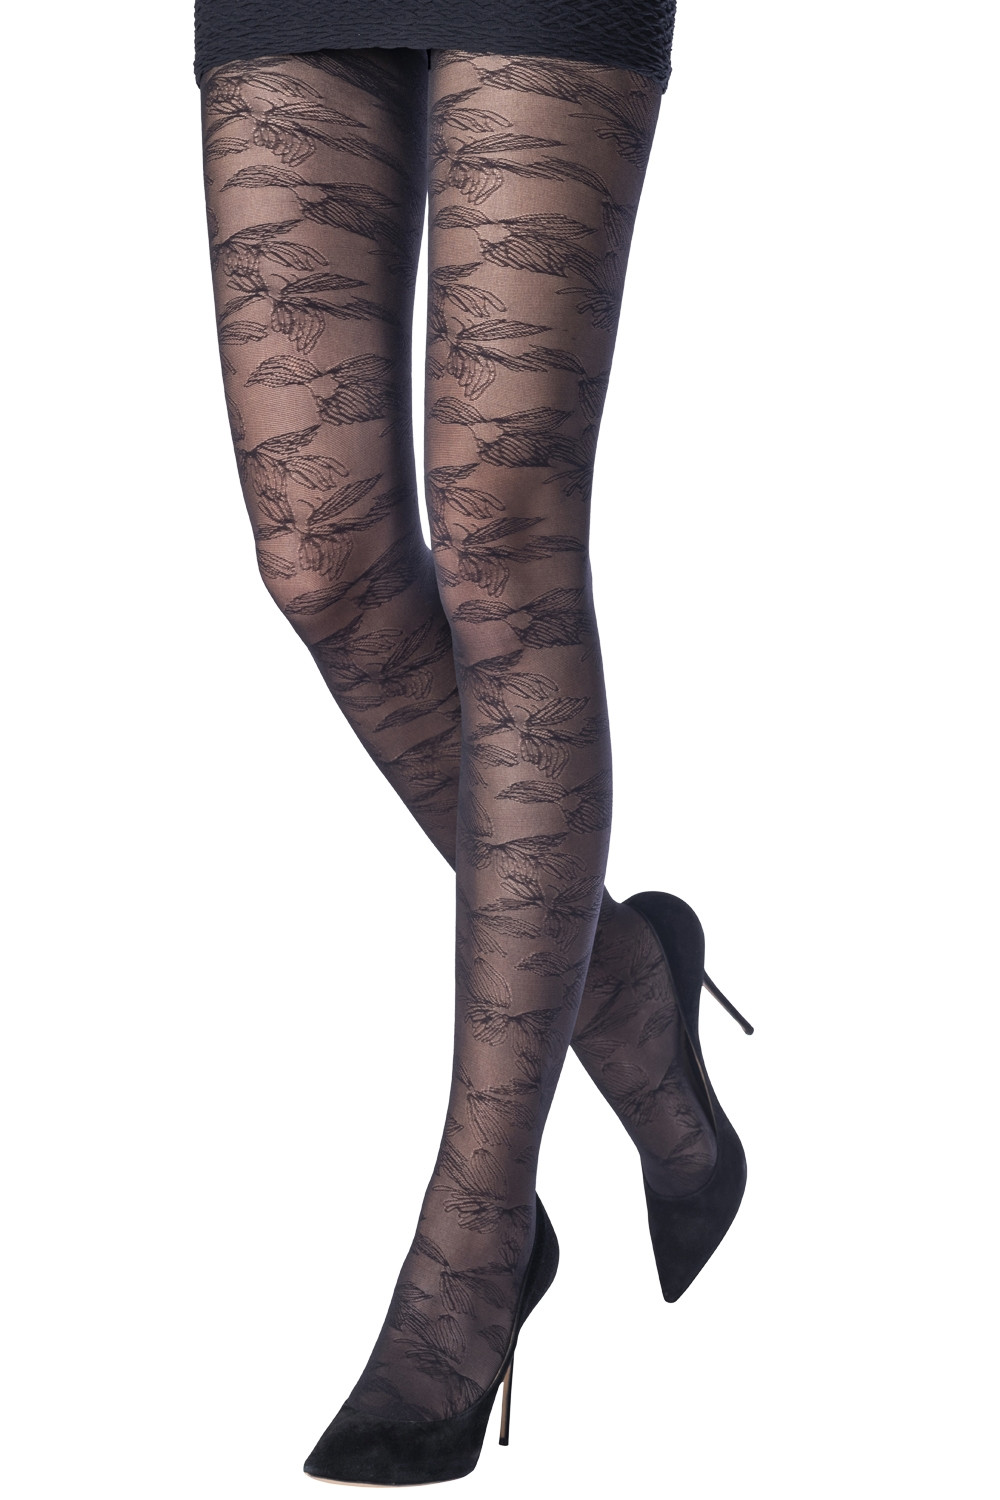 FLOWERS IN THE WIND TIGHTS